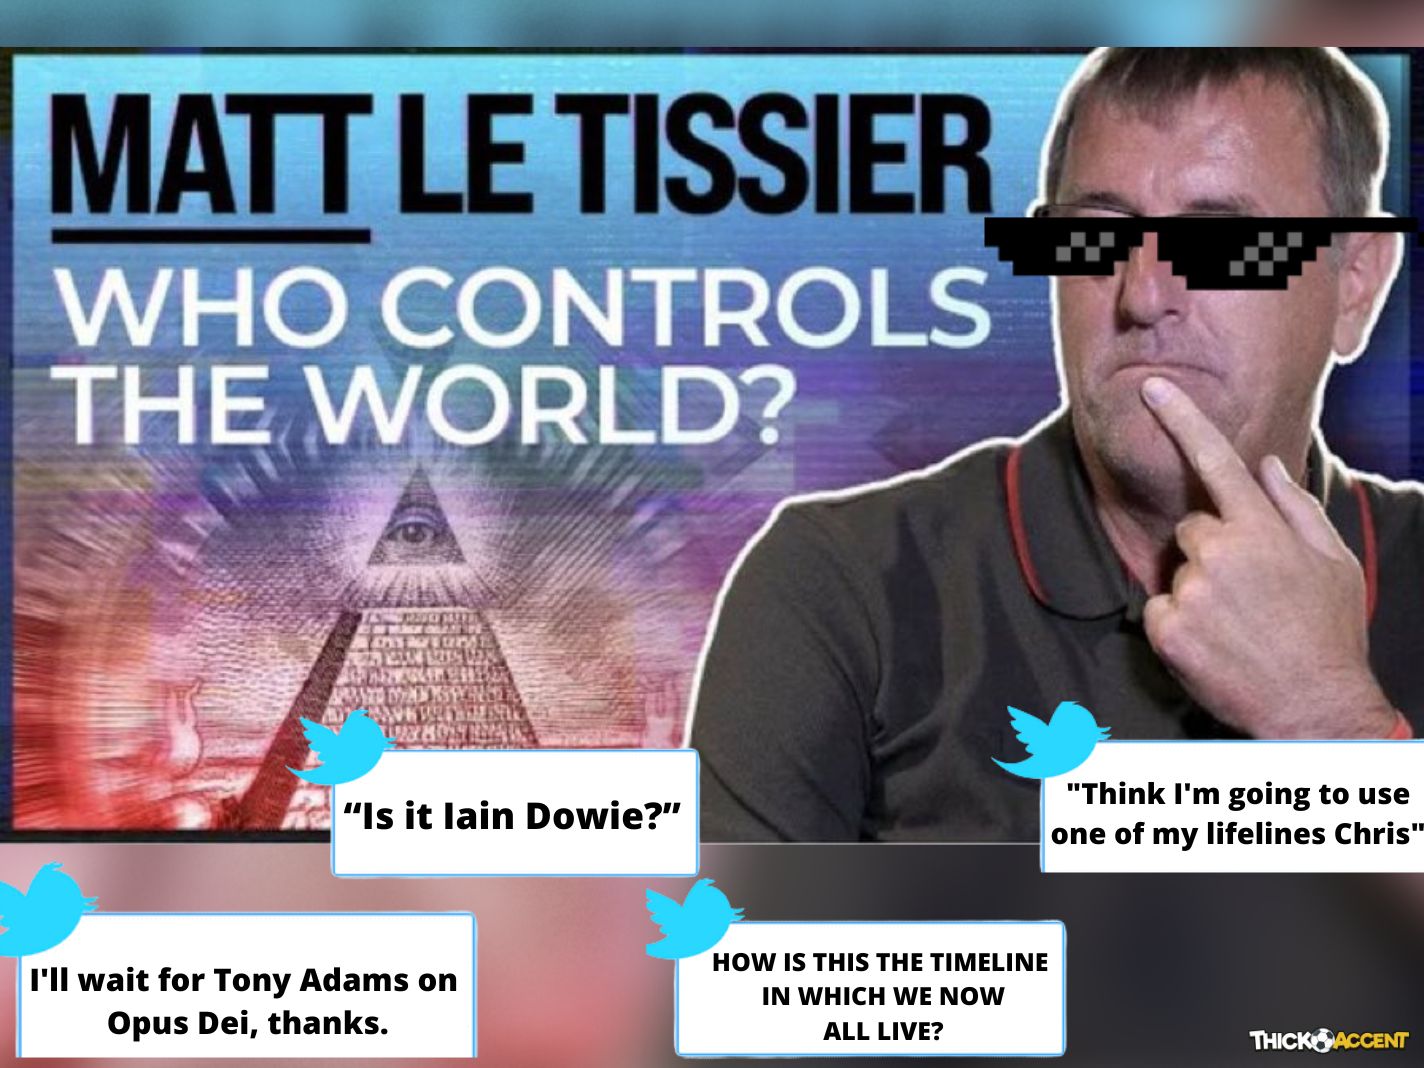 Who controls the world? Matt Le Tissier is on the case